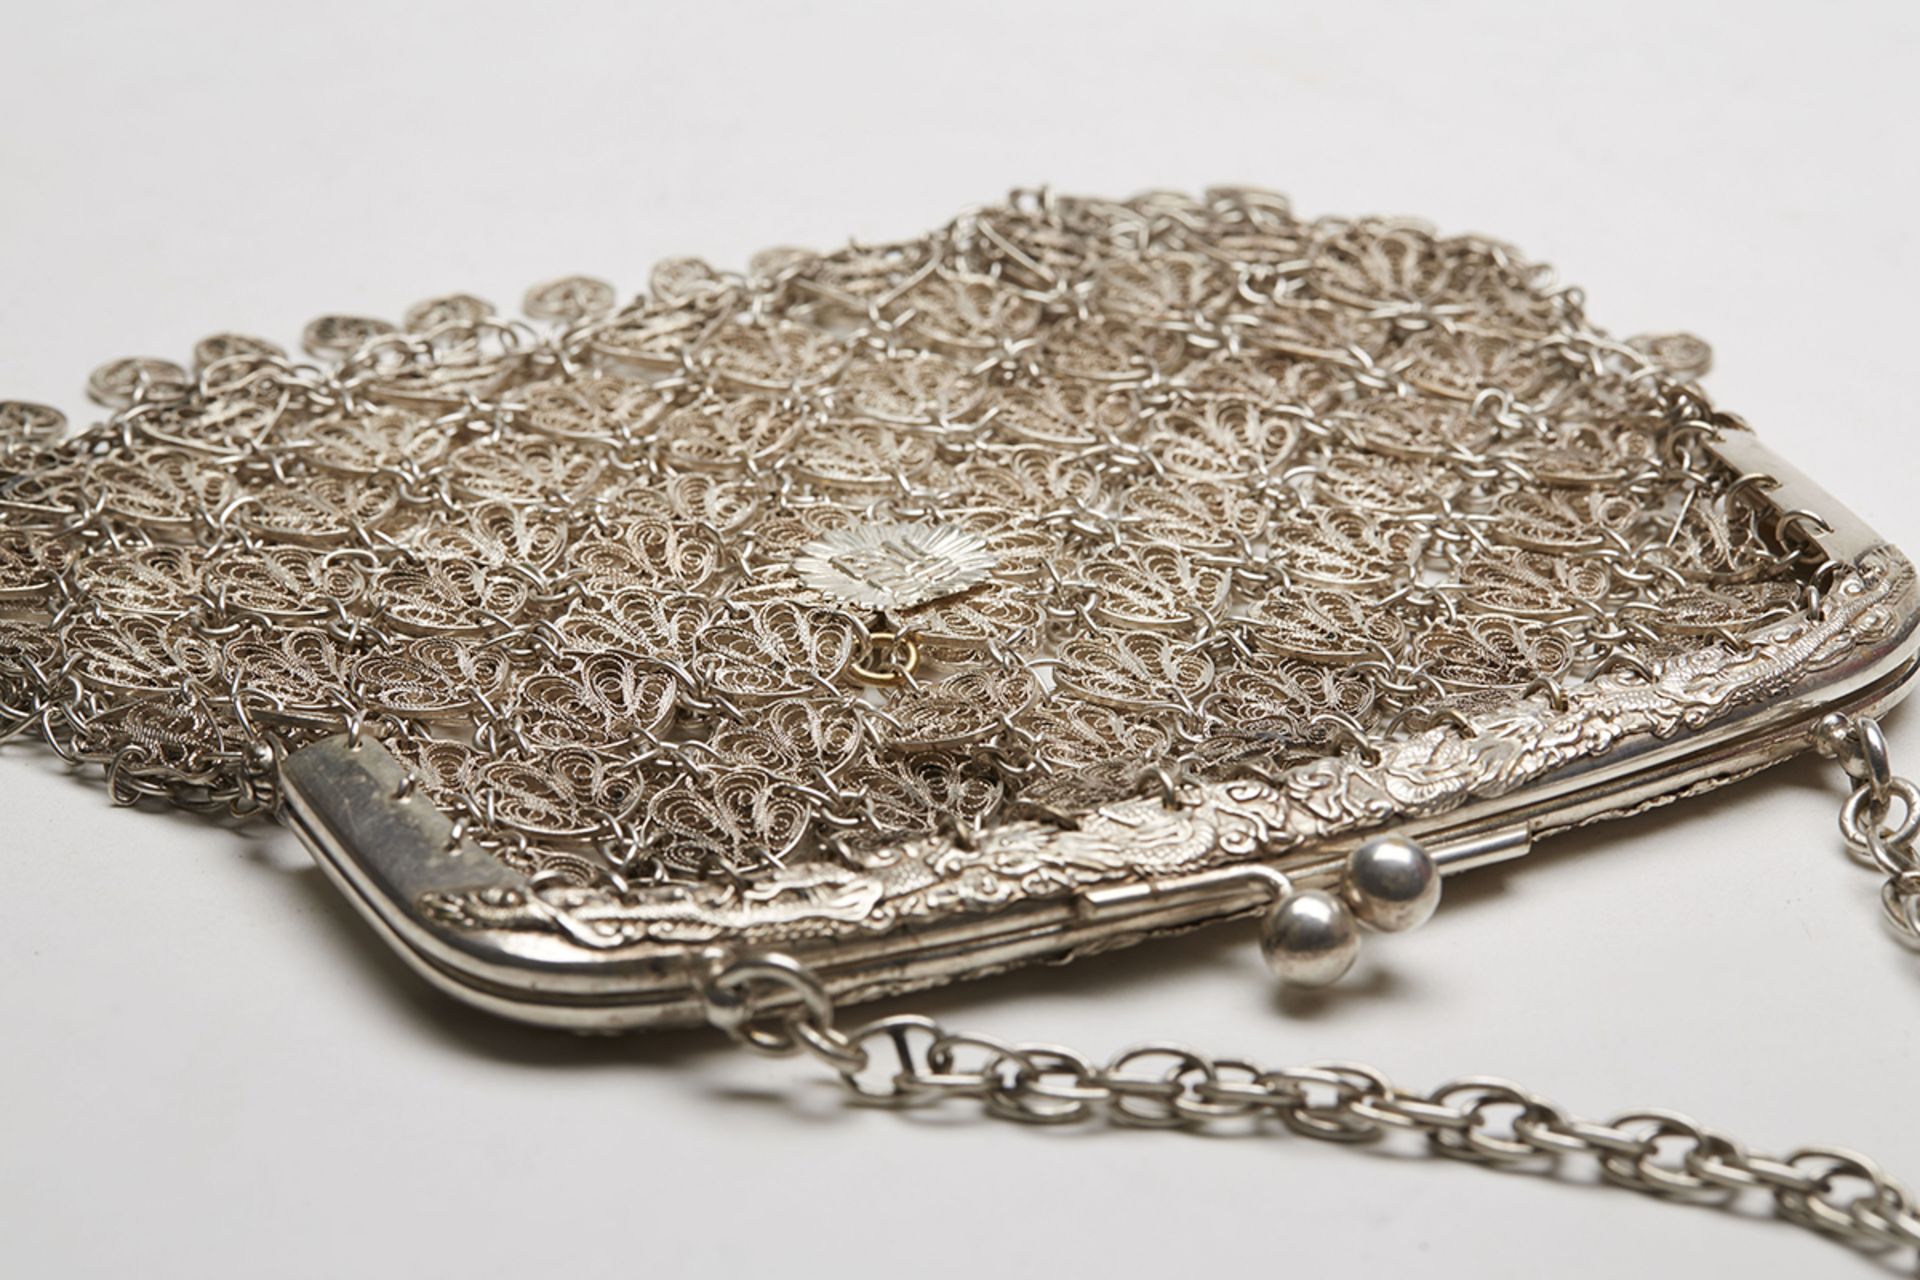 Antique Chinese Heavy Silver Filigree Chain Purse C.1900 - Image 10 of 10